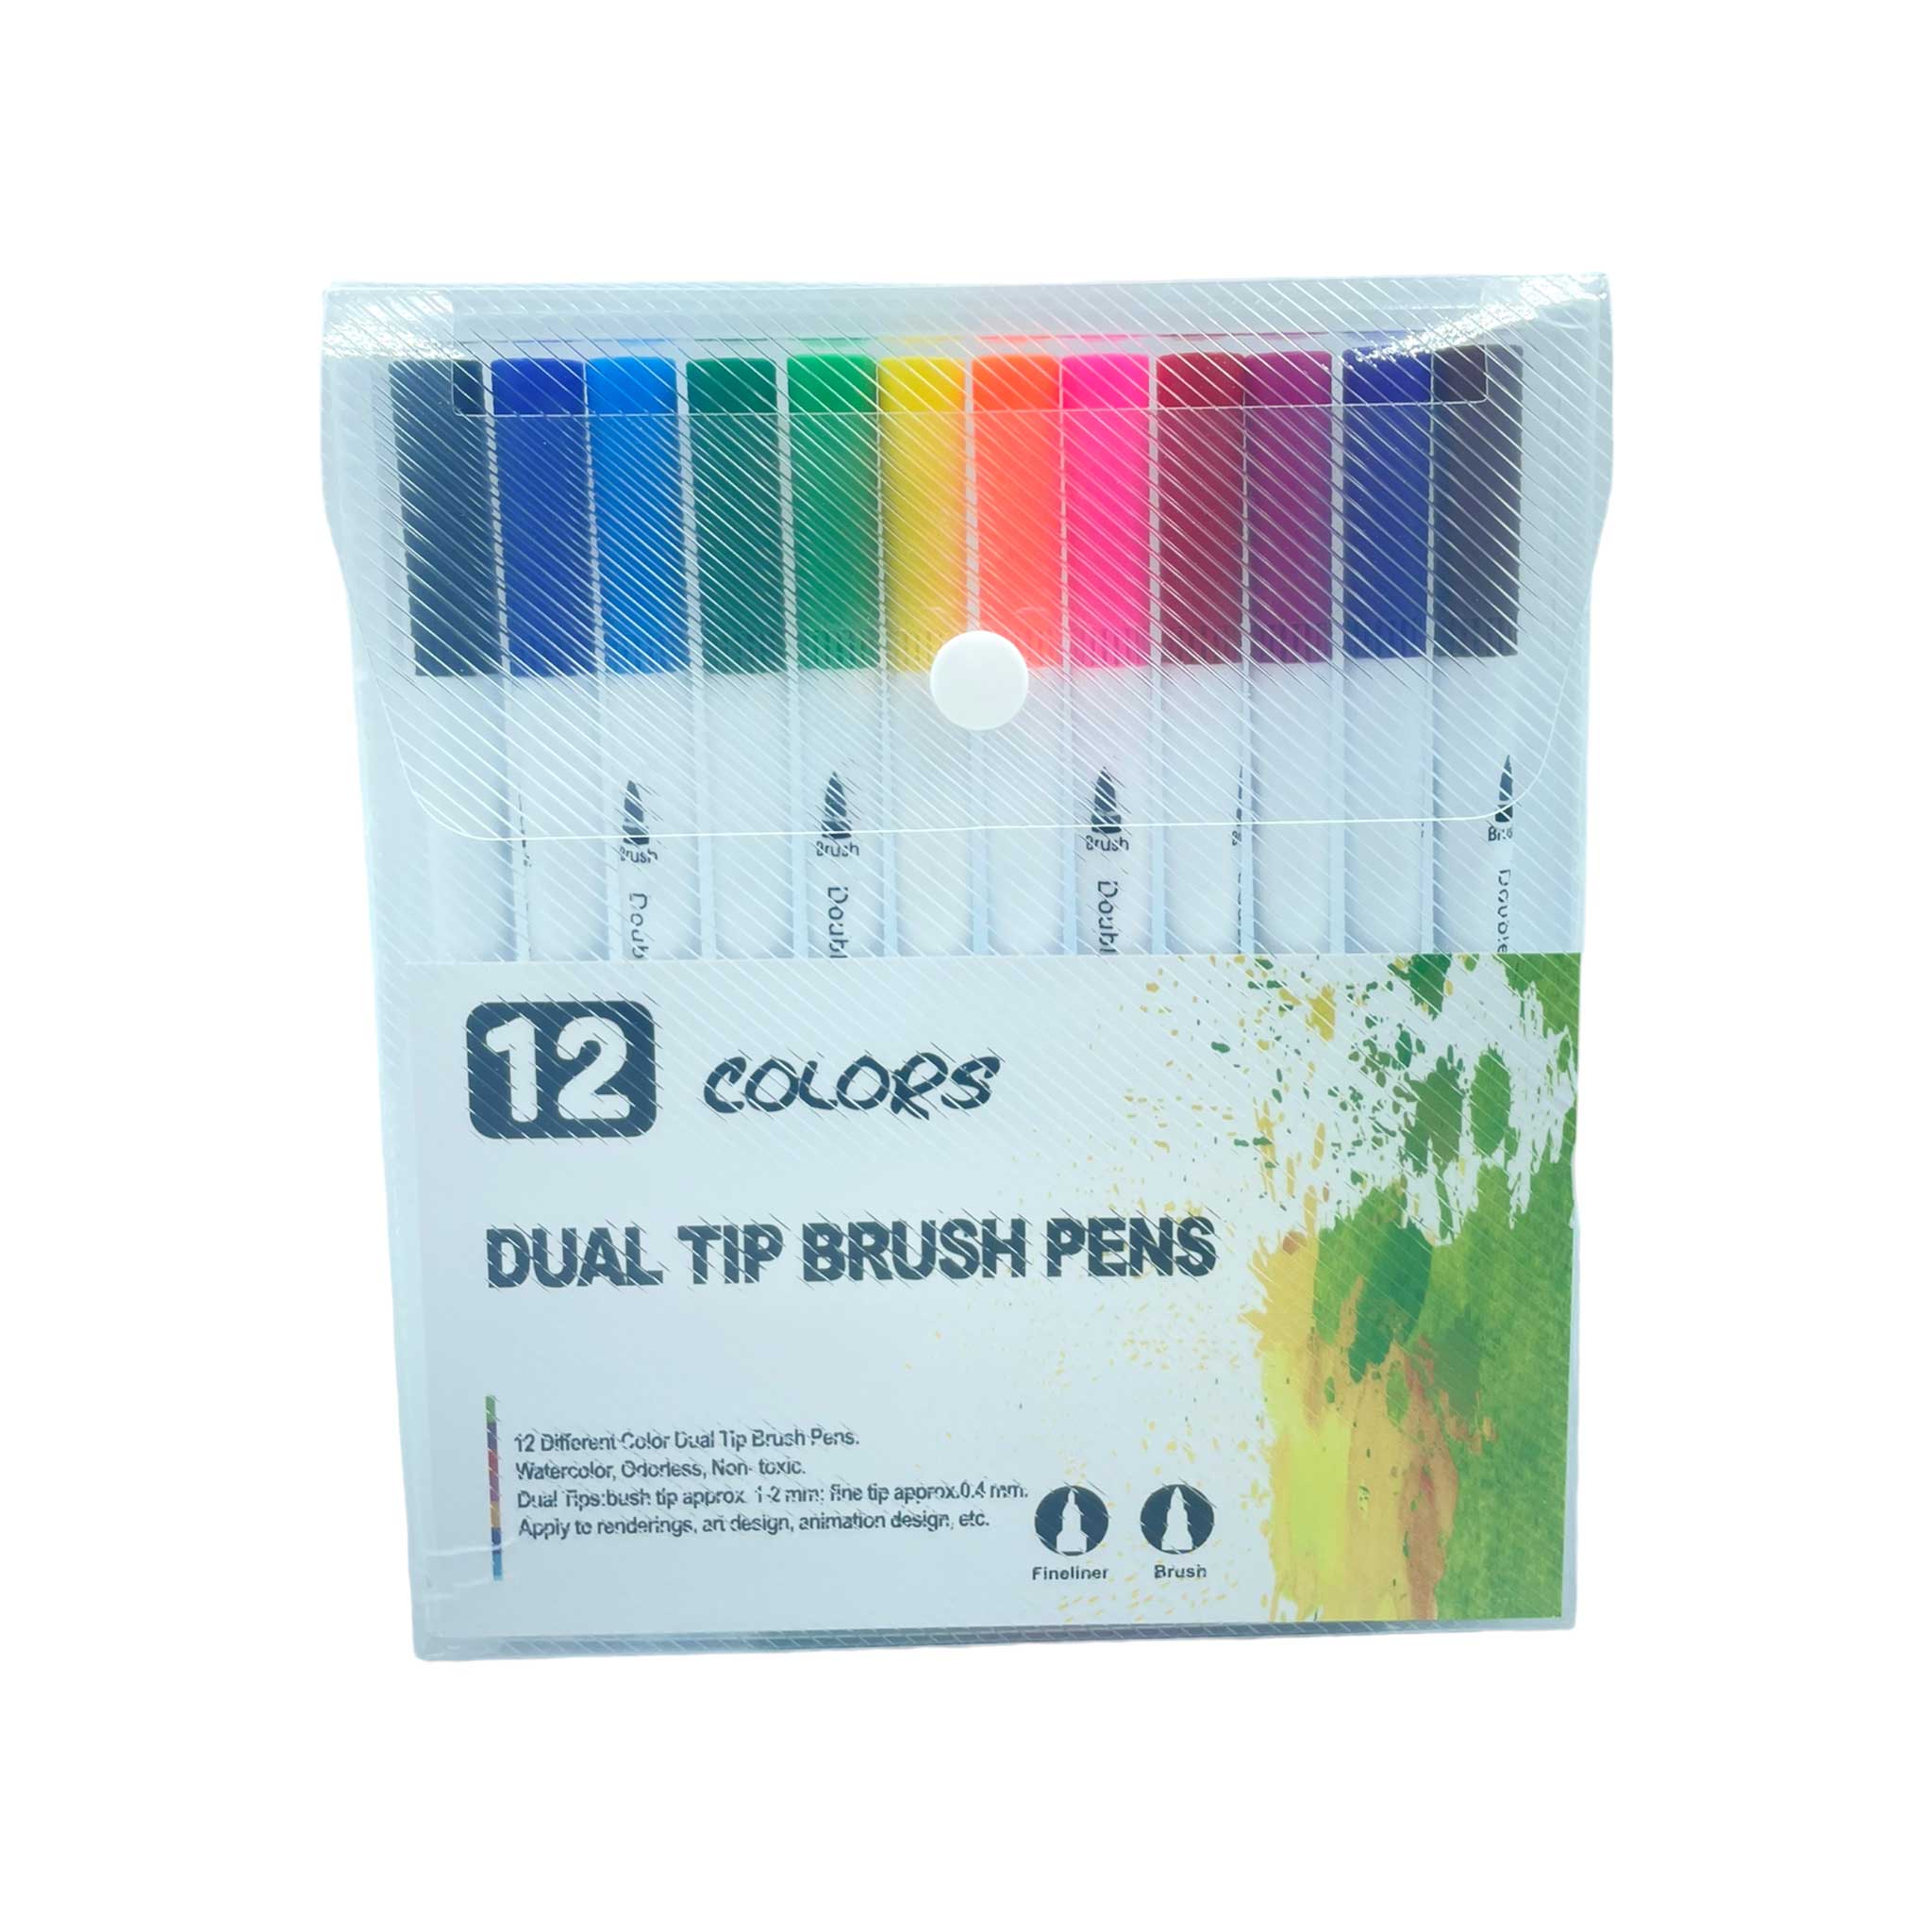 72 Colors Dual Tip Brush Pens Highlighter 72 Art Markers 0.4mm